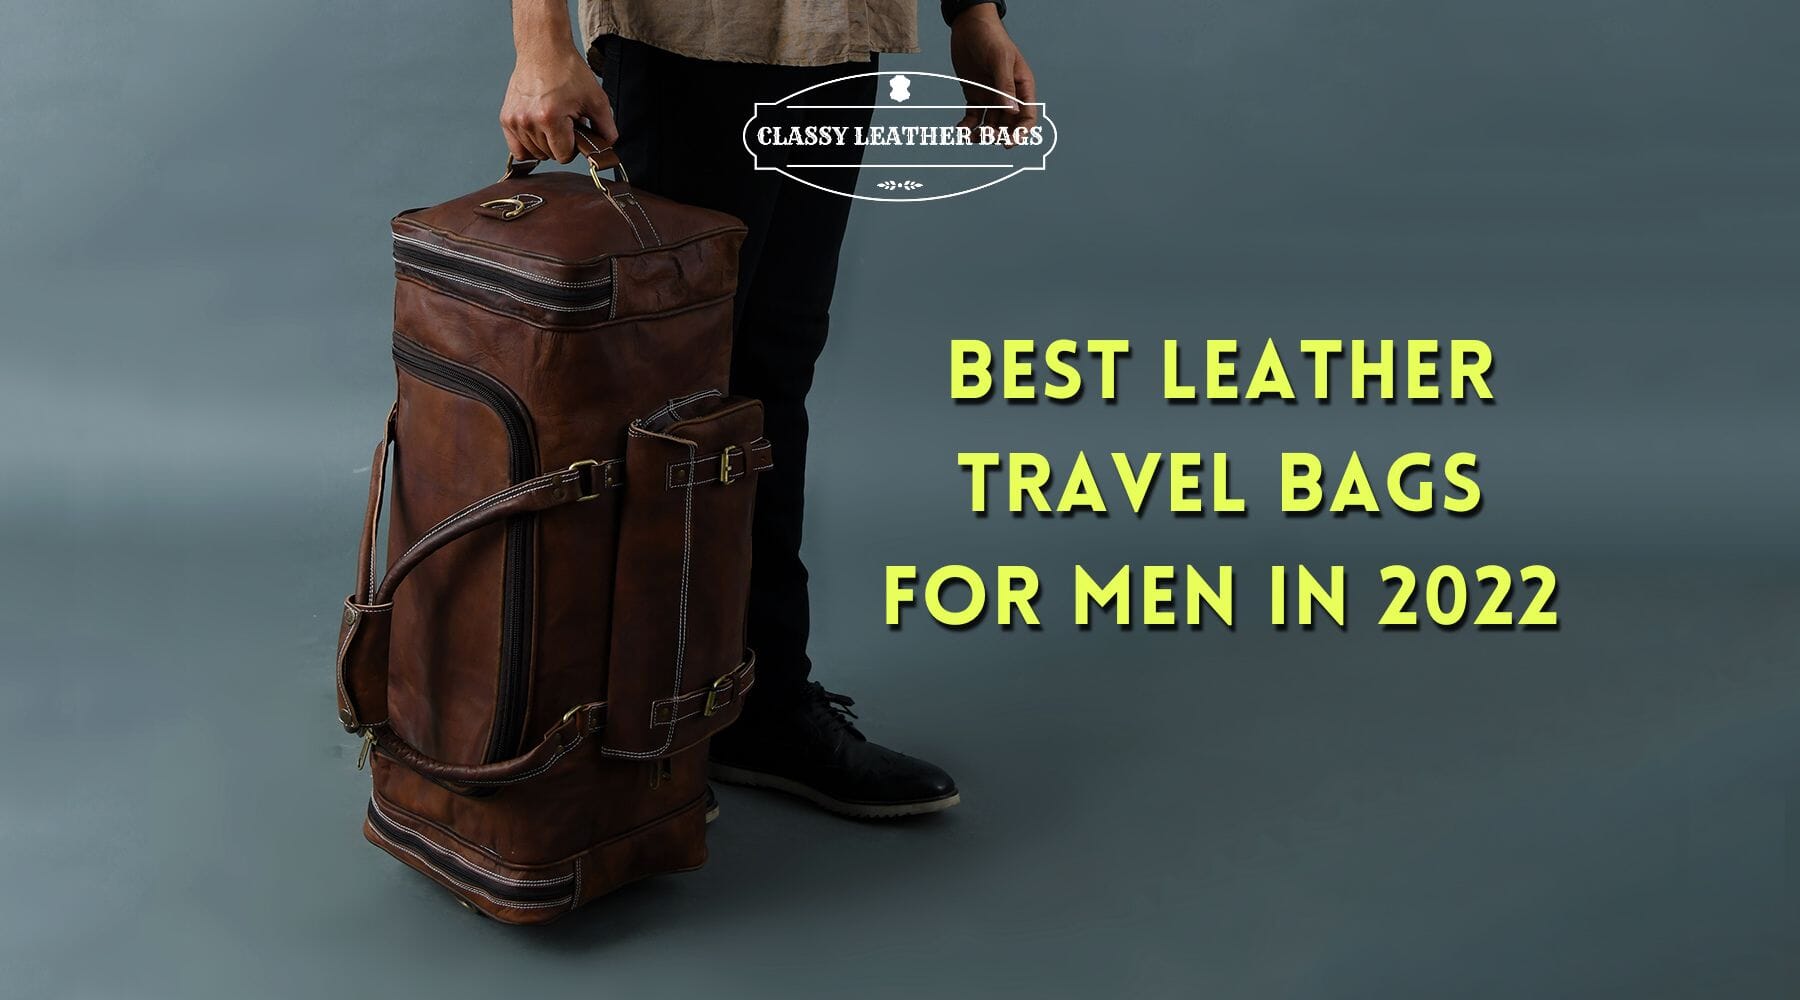 10 Best Leather Travel Bags for Men in 2022